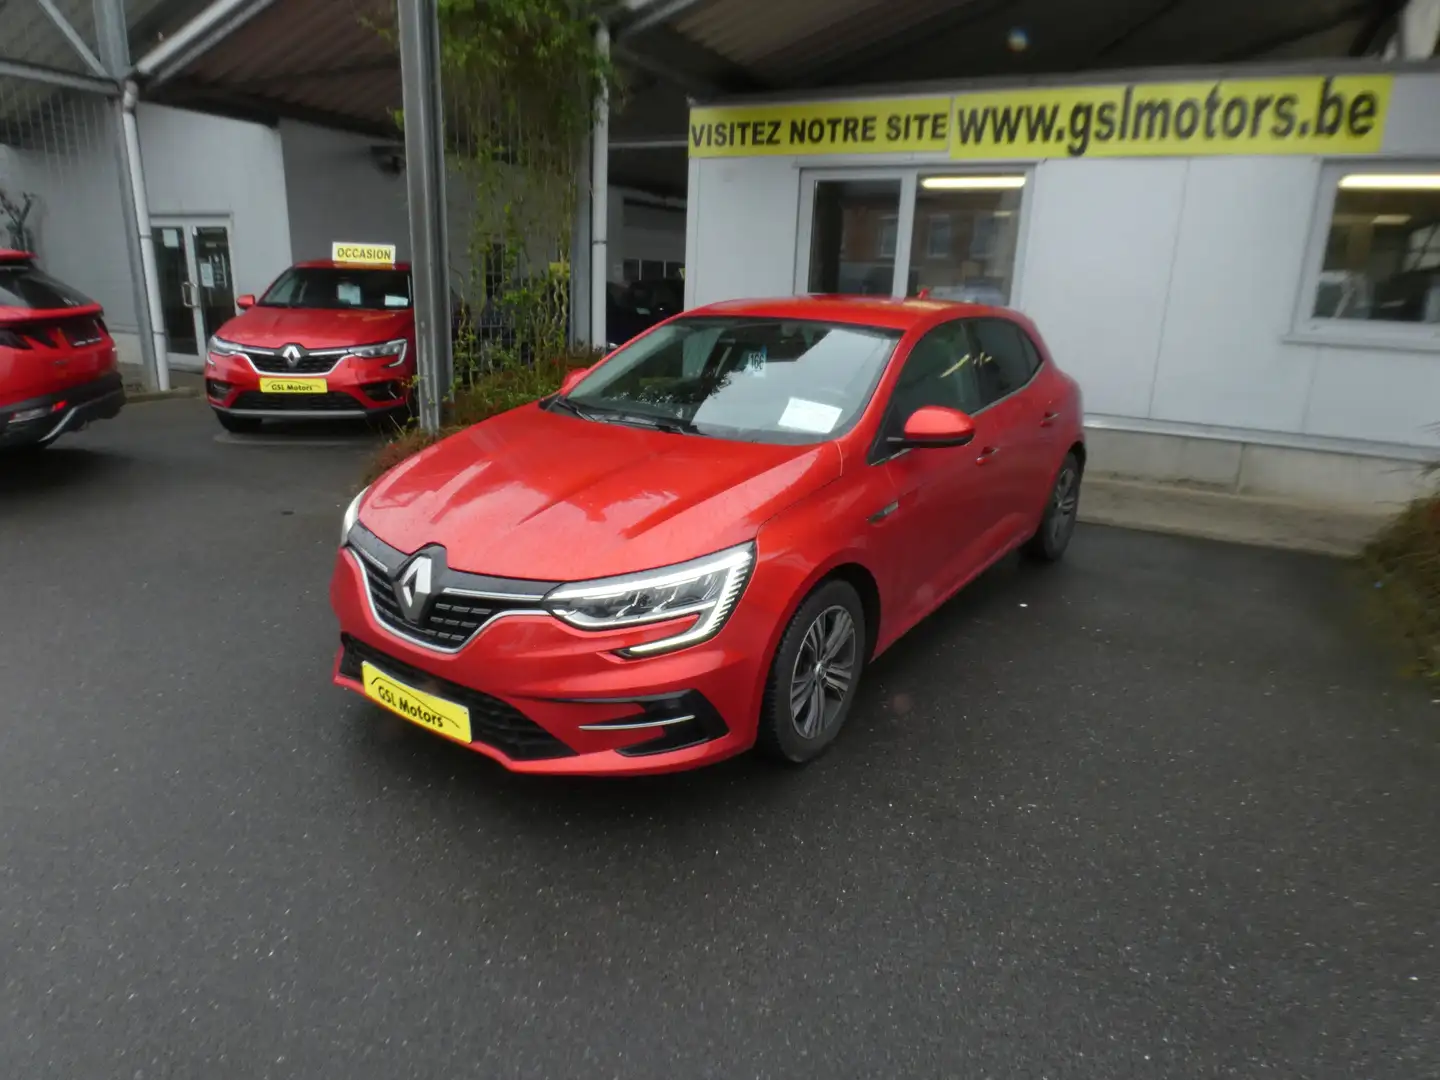 Renault Megane 1.5dCi115 bordeaux 06/21 65.659km Airco Cruise GPS Red - 1